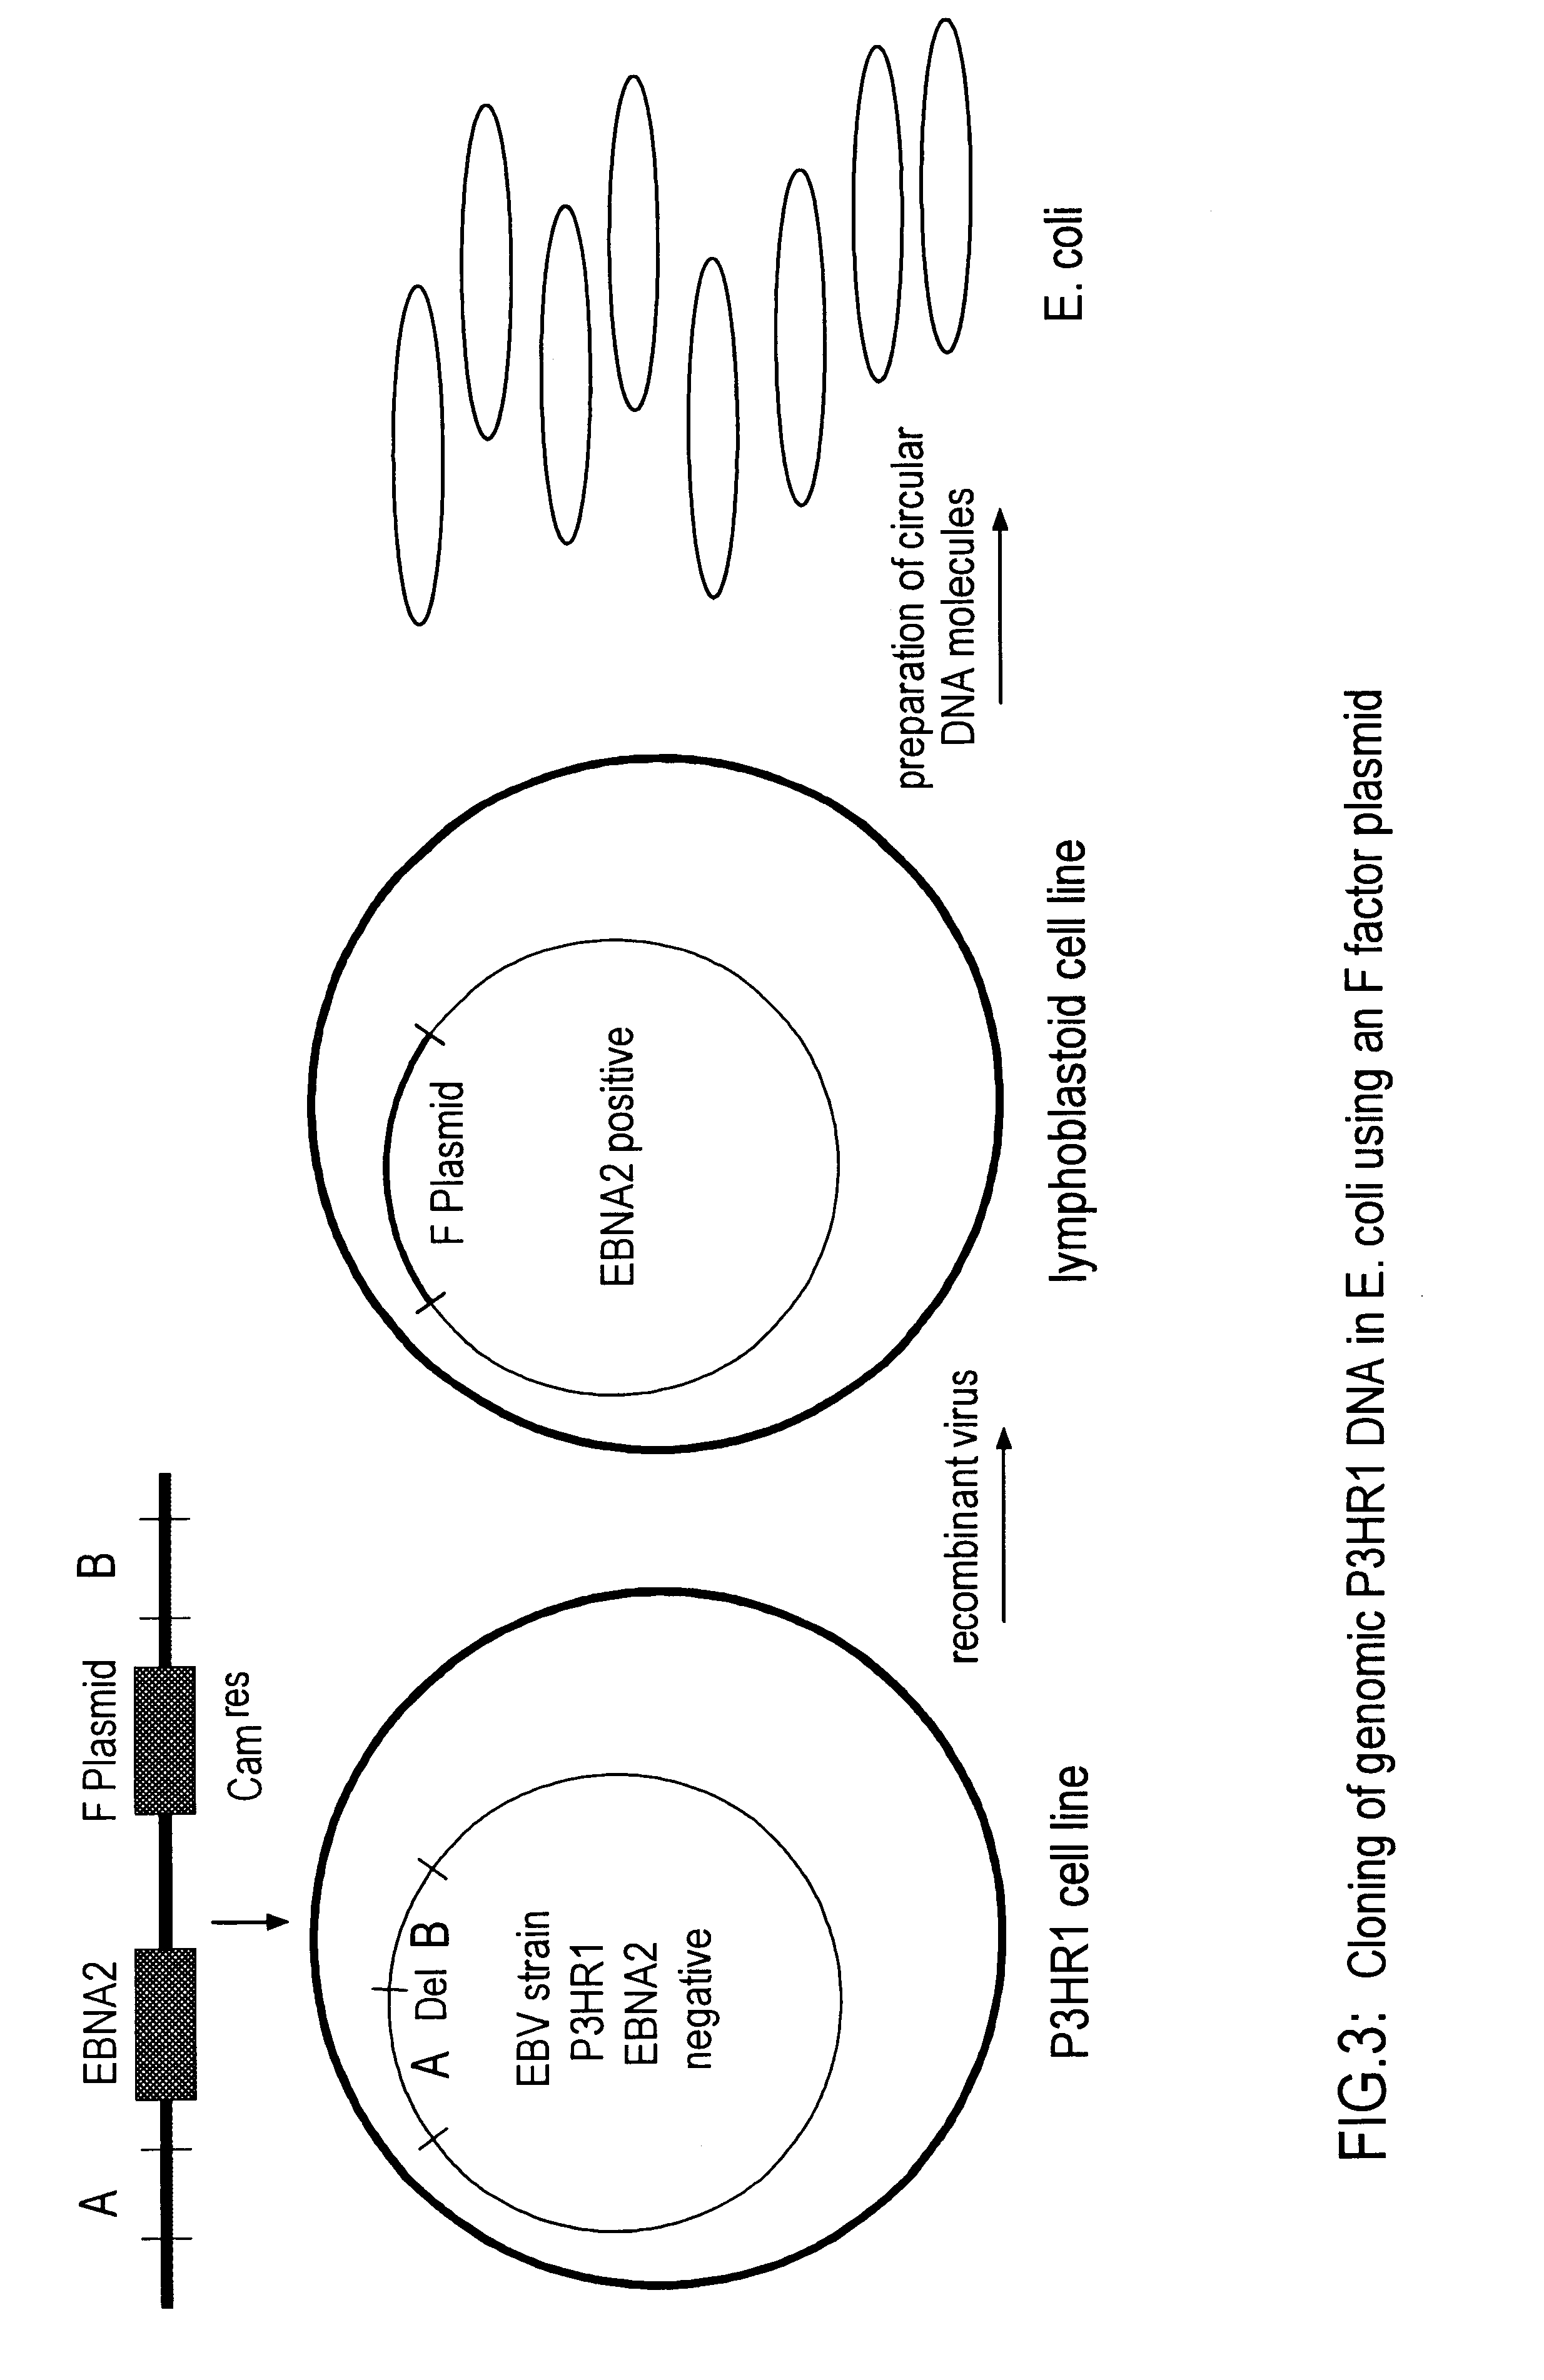 DNA virus vectors and methods for their preparation